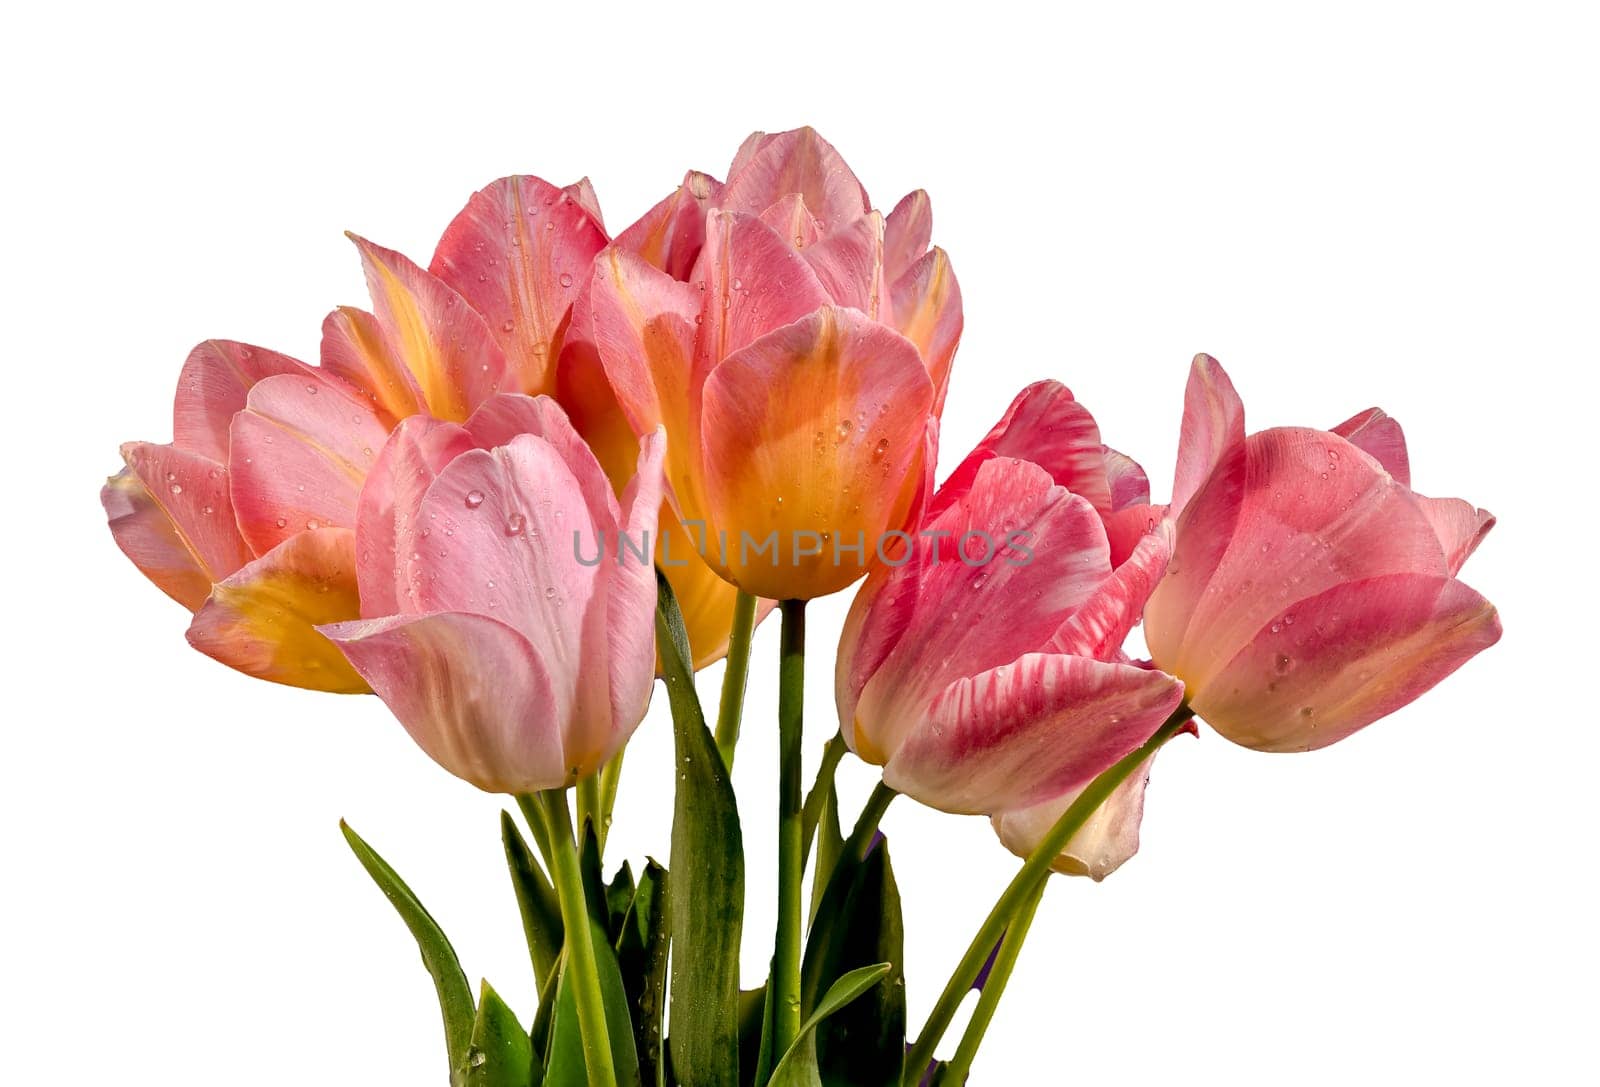 Beautiful blooming pink tulips flowers isolated on a white background. Flower head close-up.